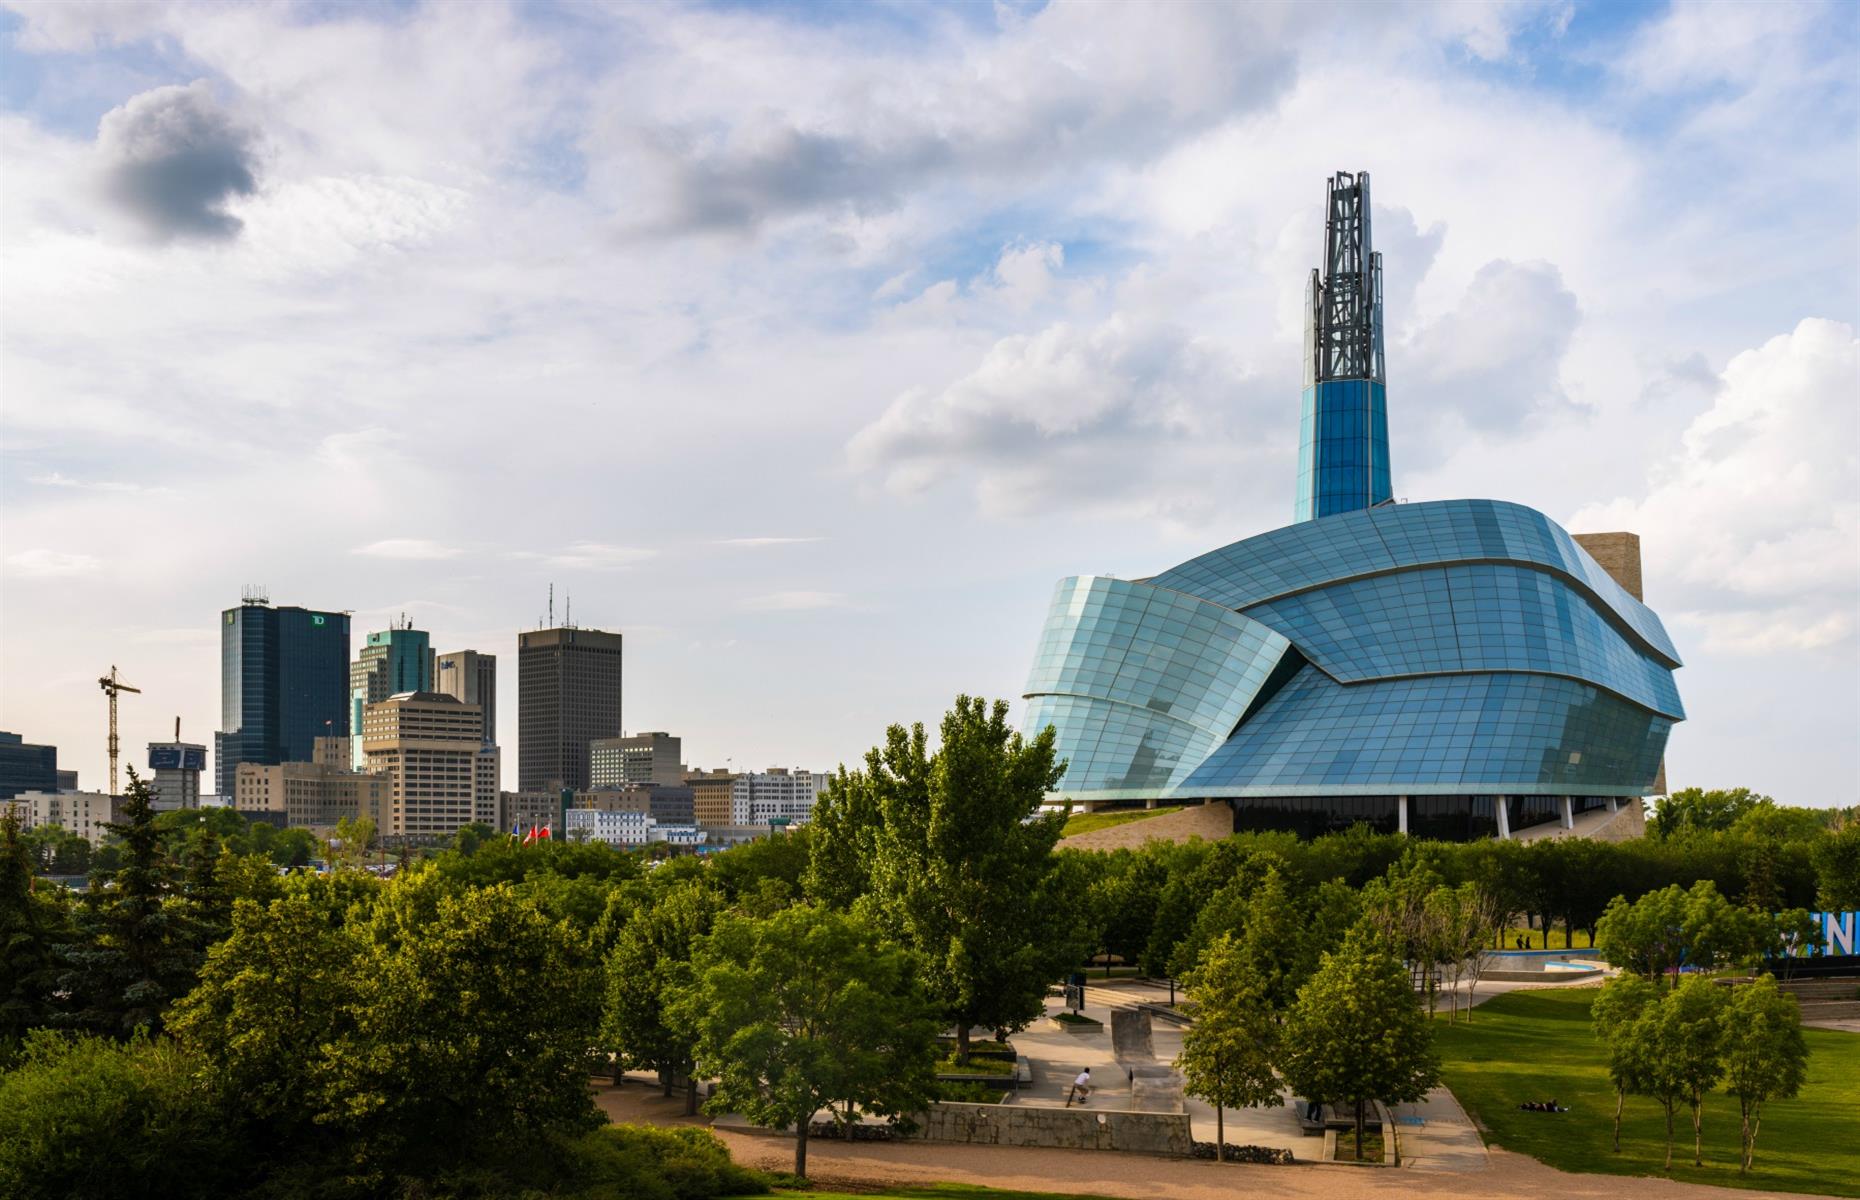 <p>Winnipeg is Manitoba’s biggest city and the capital of the province, but it’s still a vastly underrated Canadian city. The city’s spirit is like none other in Canada. It’s far enough from both the big city bluster of <a href="https://www.loveexploring.com/news/88789/7-cultural-highlights-you-mustnt-miss-in-toronto">Toronto</a> and the laid-back lifestyle of the west coast that that it has been able to develop a distinct identity. The city has also earned its share of the national spotlight due to the architectural wonder and cultural significance of the Canadian Museum for Human Rights.</p>